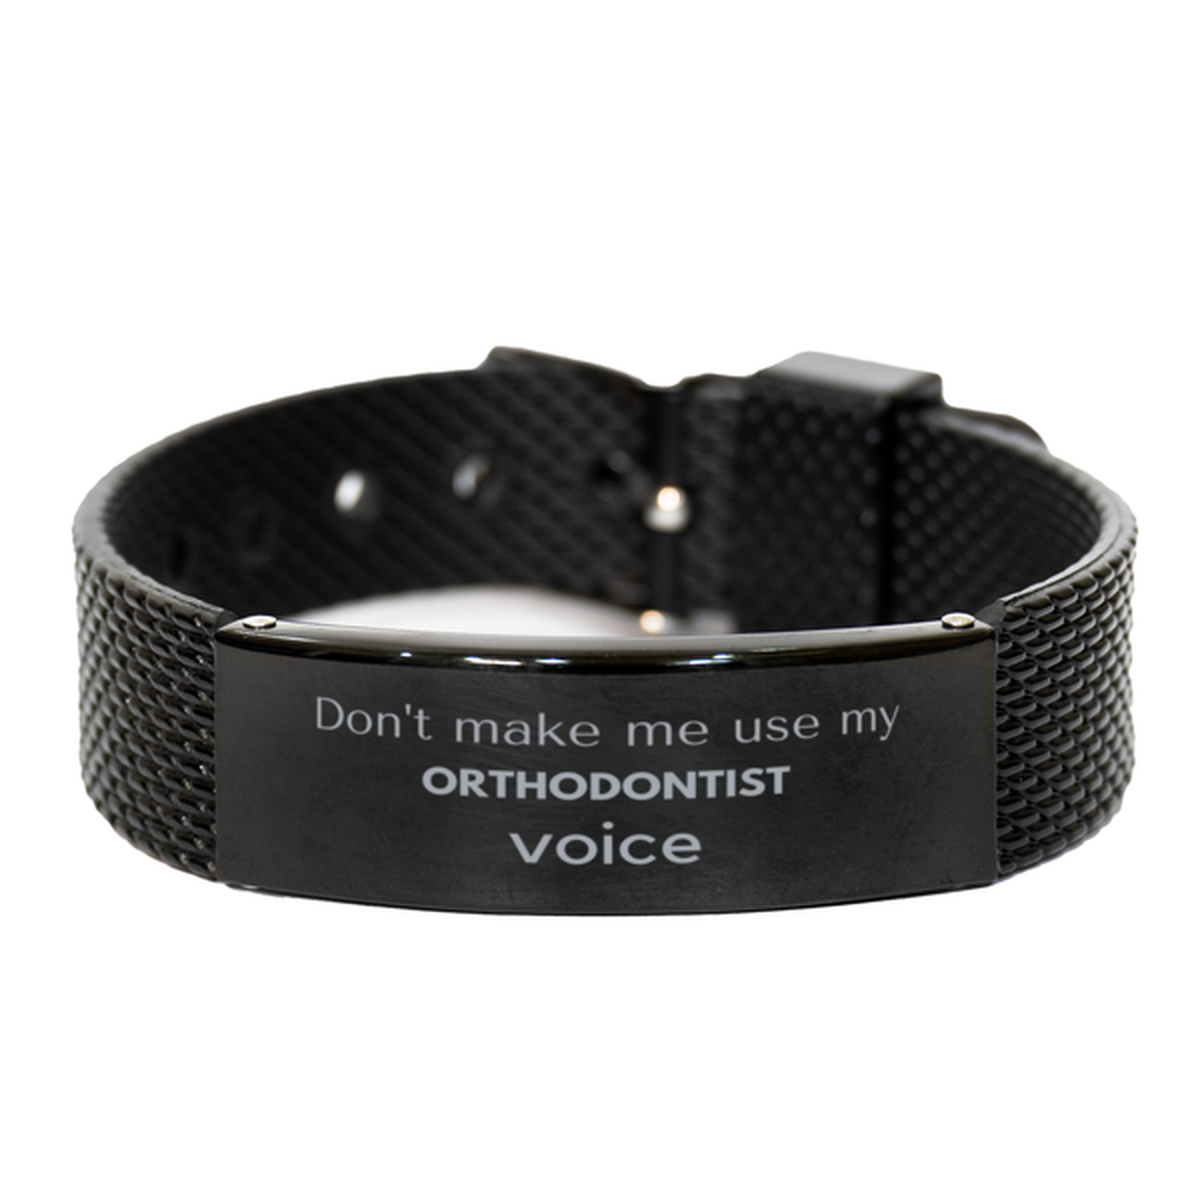 Don't make me use my Orthodontist voice, Sarcasm Orthodontist Gifts, Christmas Orthodontist Black Shark Mesh Bracelet Birthday Unique Gifts For Orthodontist Coworkers, Men, Women, Colleague, Friends